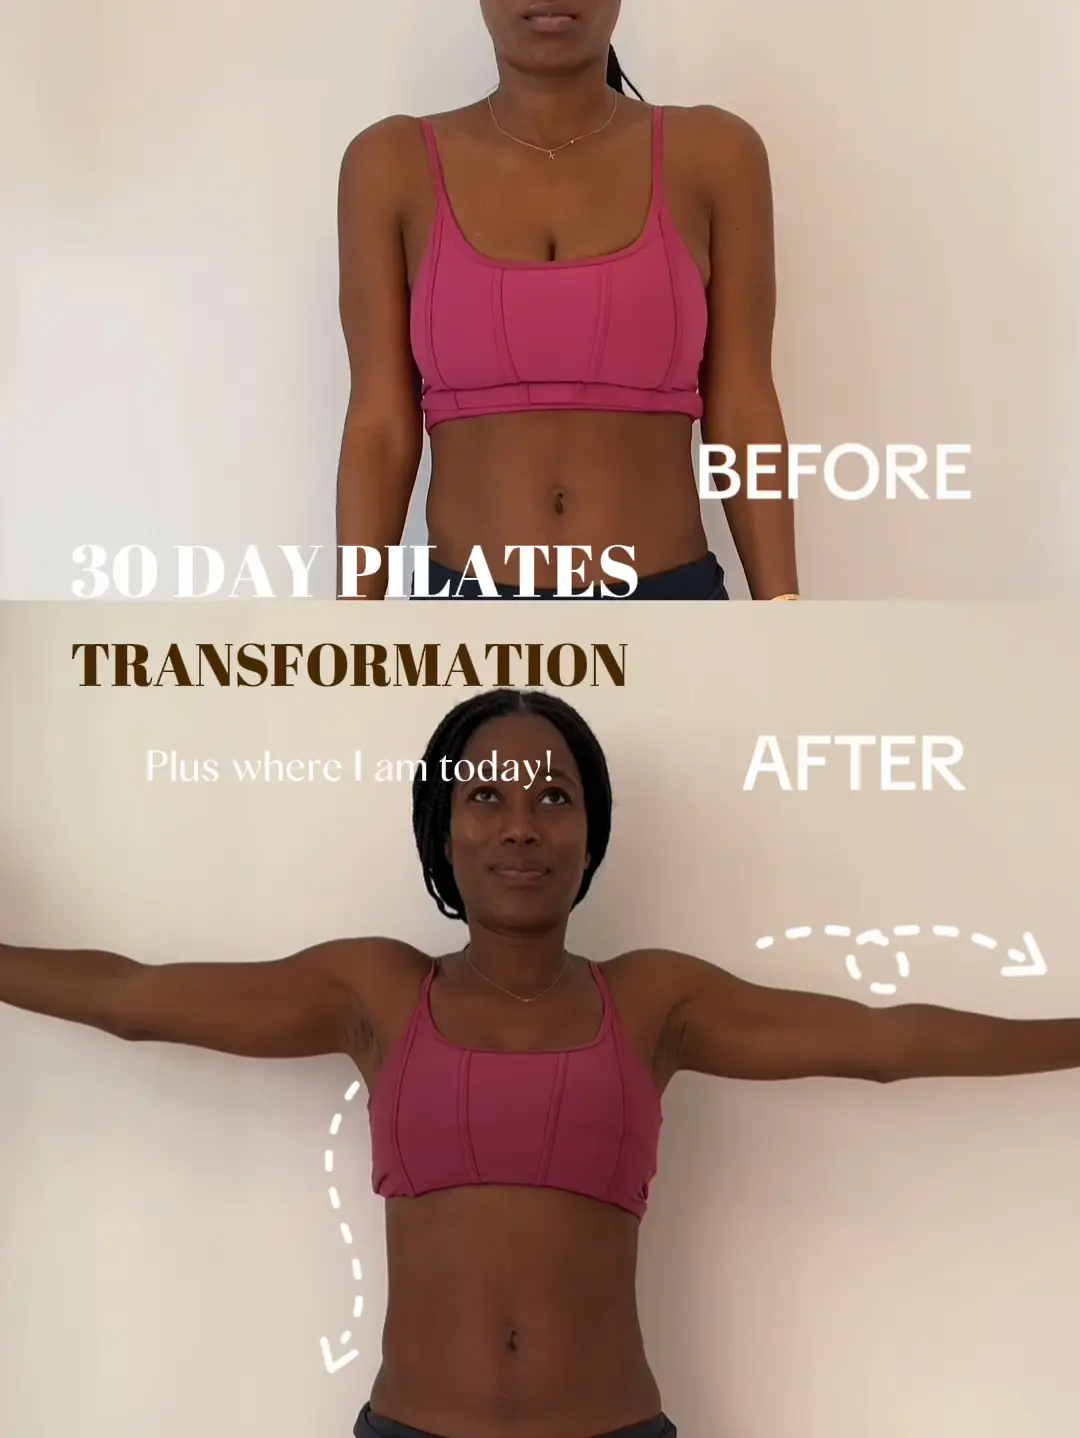 30 Day Pilates Transformation, Video published by Kaylyn